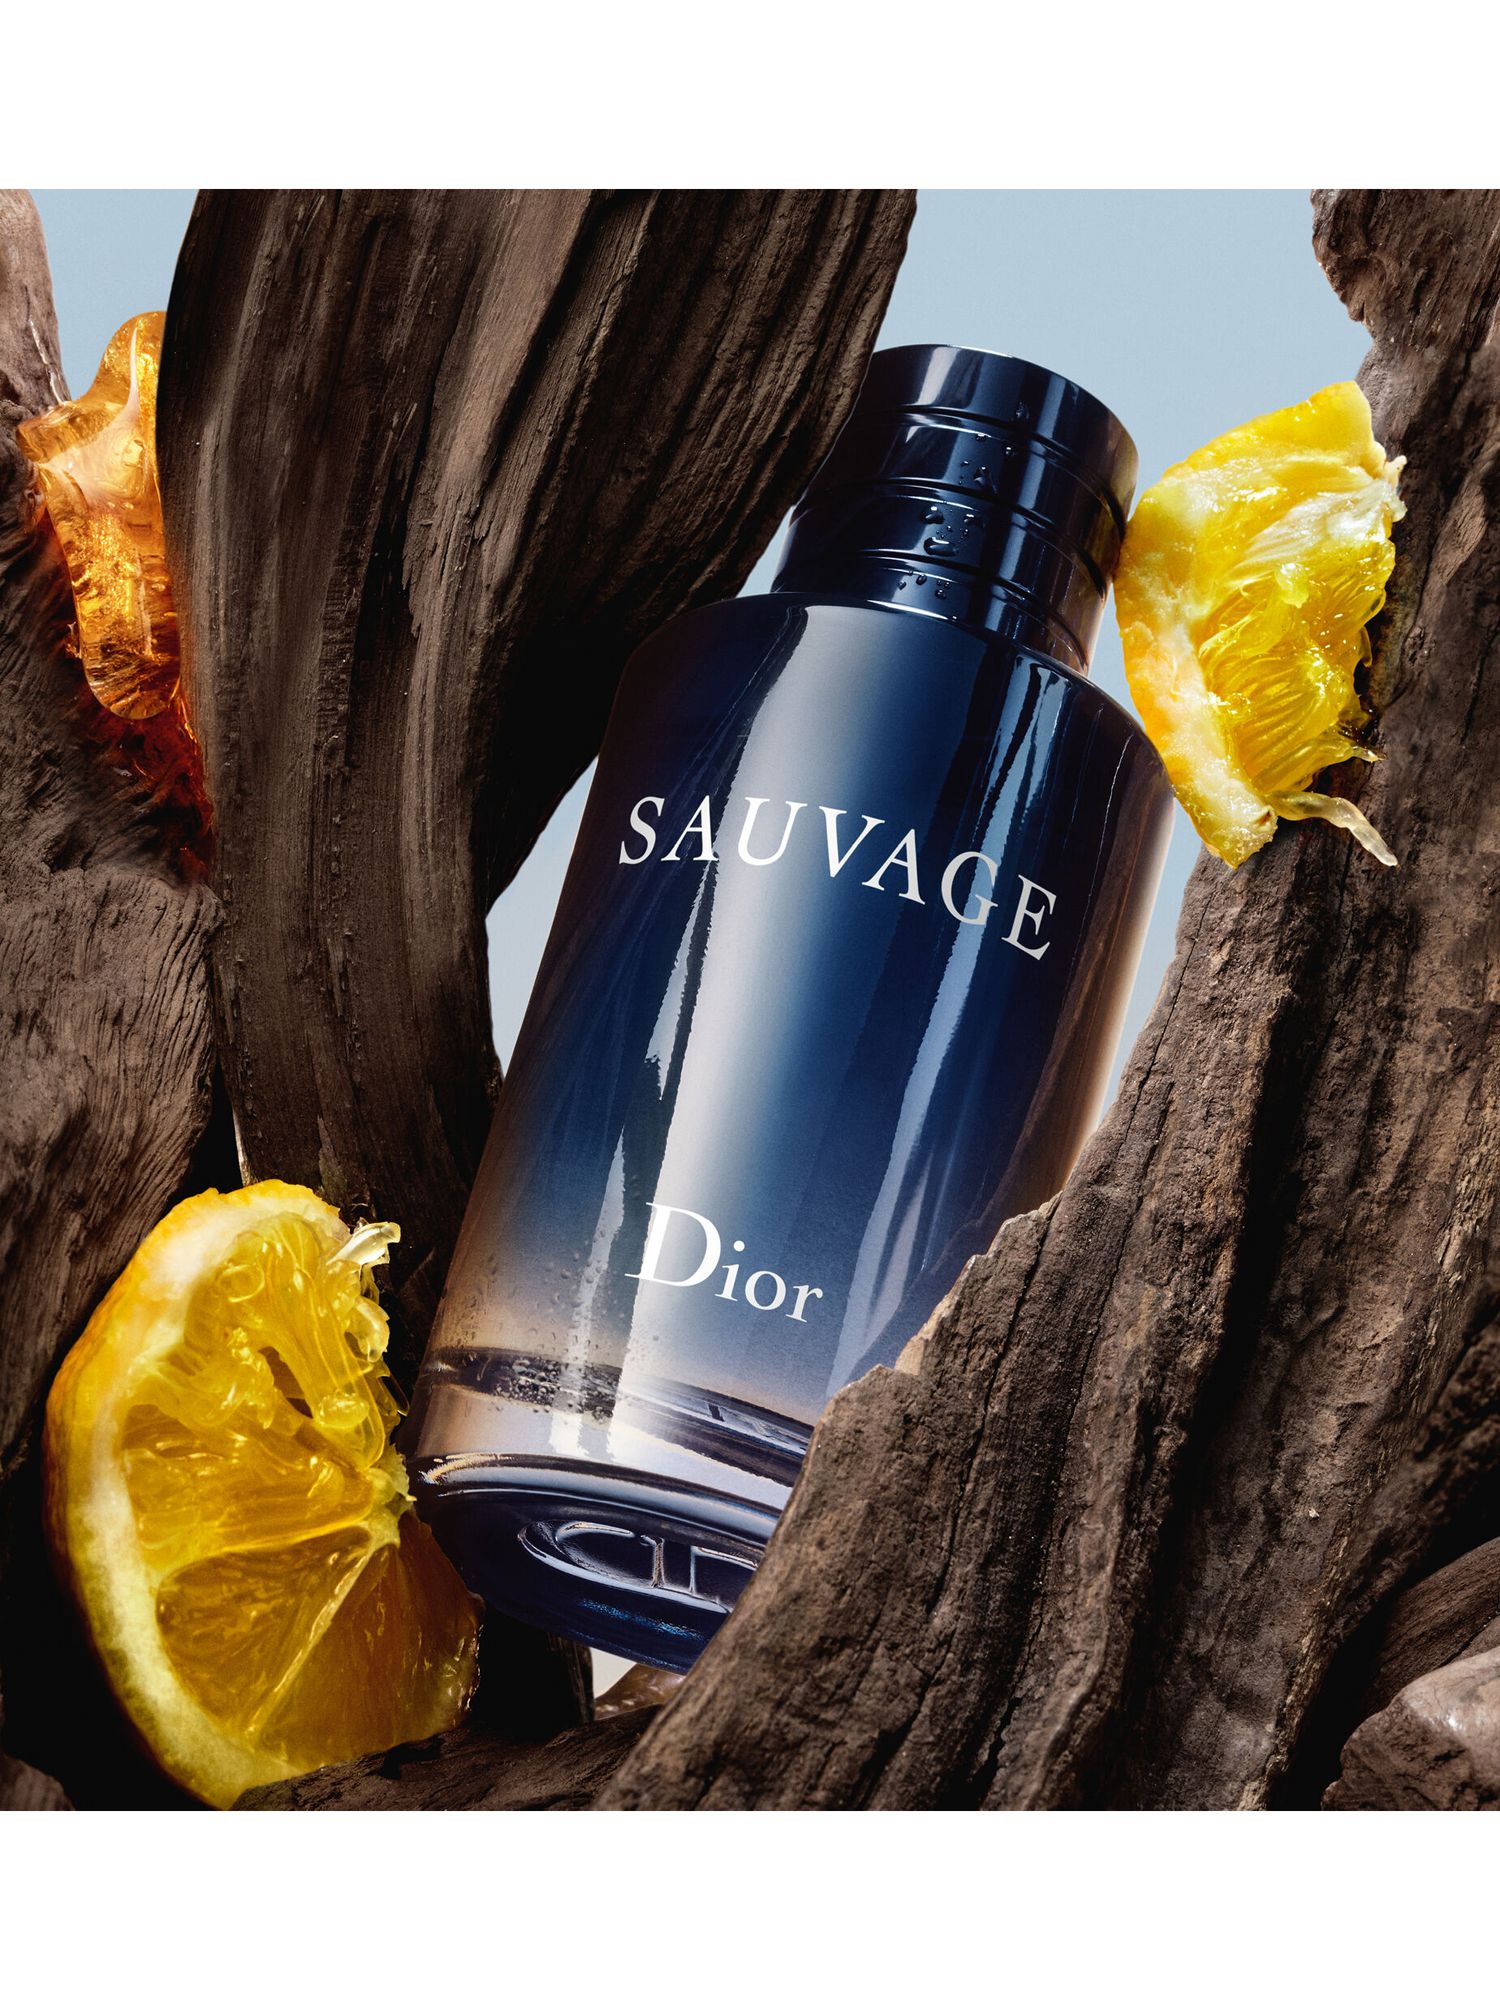 sauvage from dior